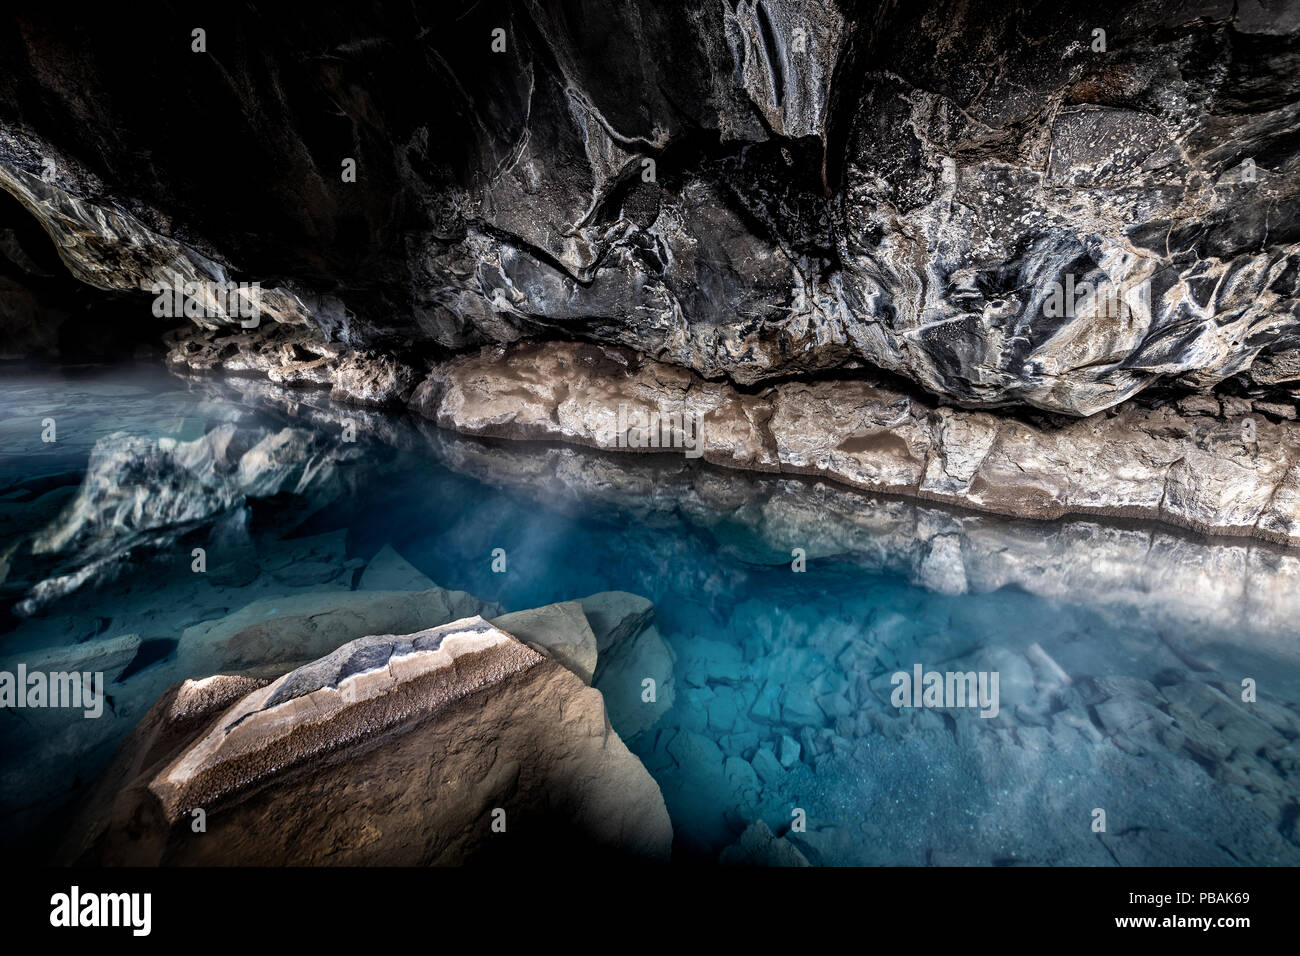 Wide angle view of inside of Grjotagja lava cave near lake Myvatn with hot springs blue, green water, rocks, rocky formations, walls, reflection Stock Photo